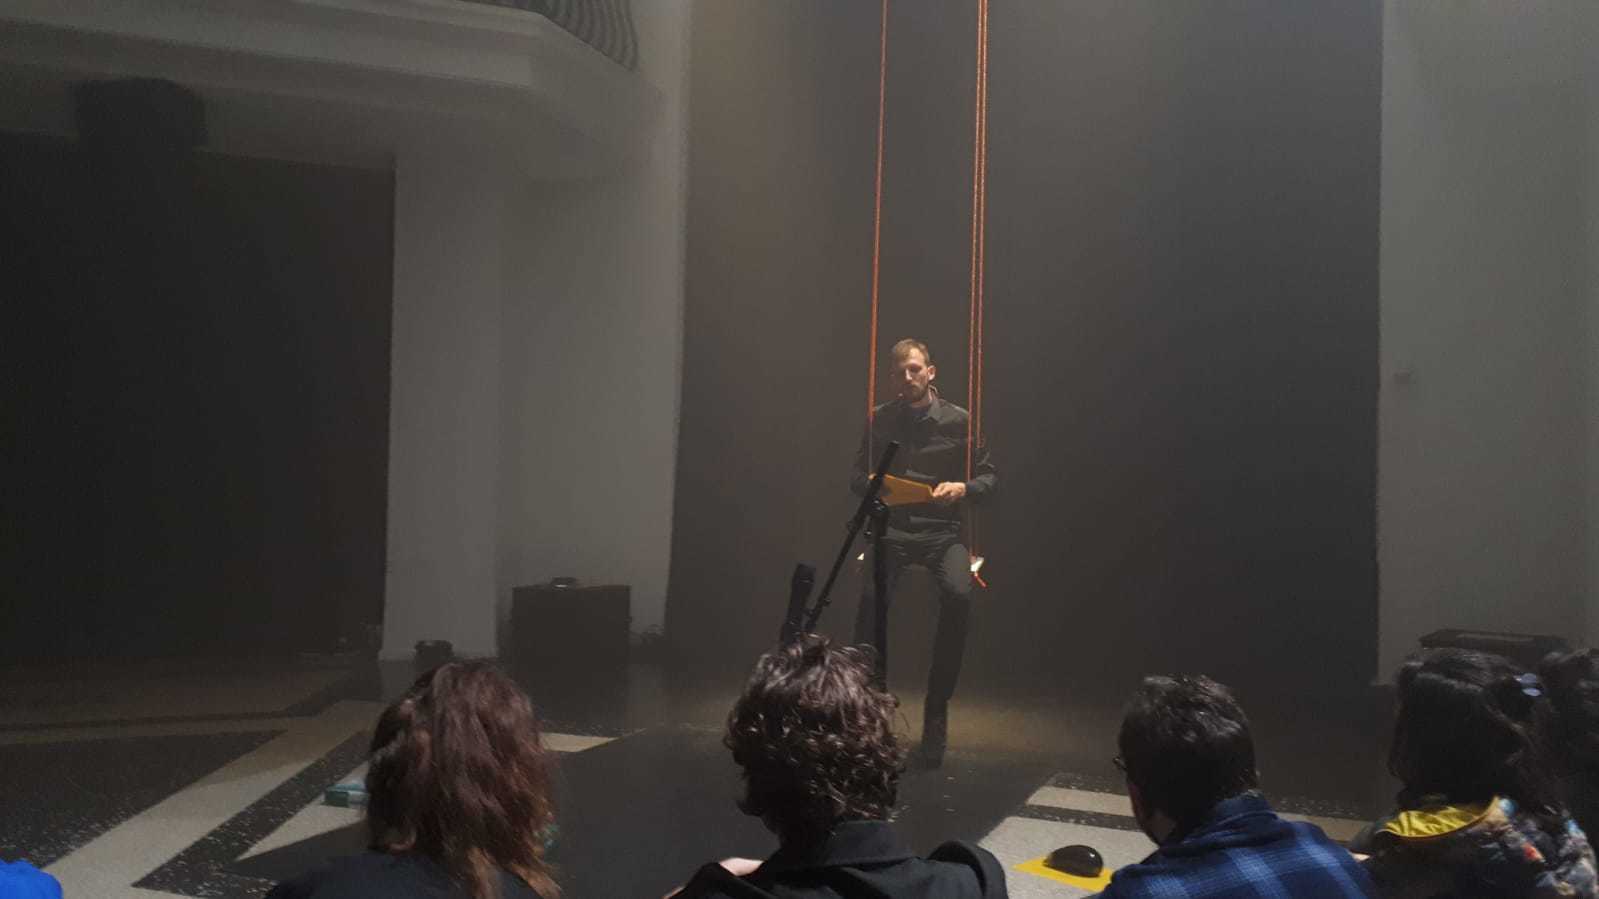 Eric Peter: Economy as Intimacy. I I C / The Contract / Ellipsis / Emotion in Motion / Delbaram / U OK? ~ AEROPONIC ACT 2019 - DAI @ silent green, Berlin. 